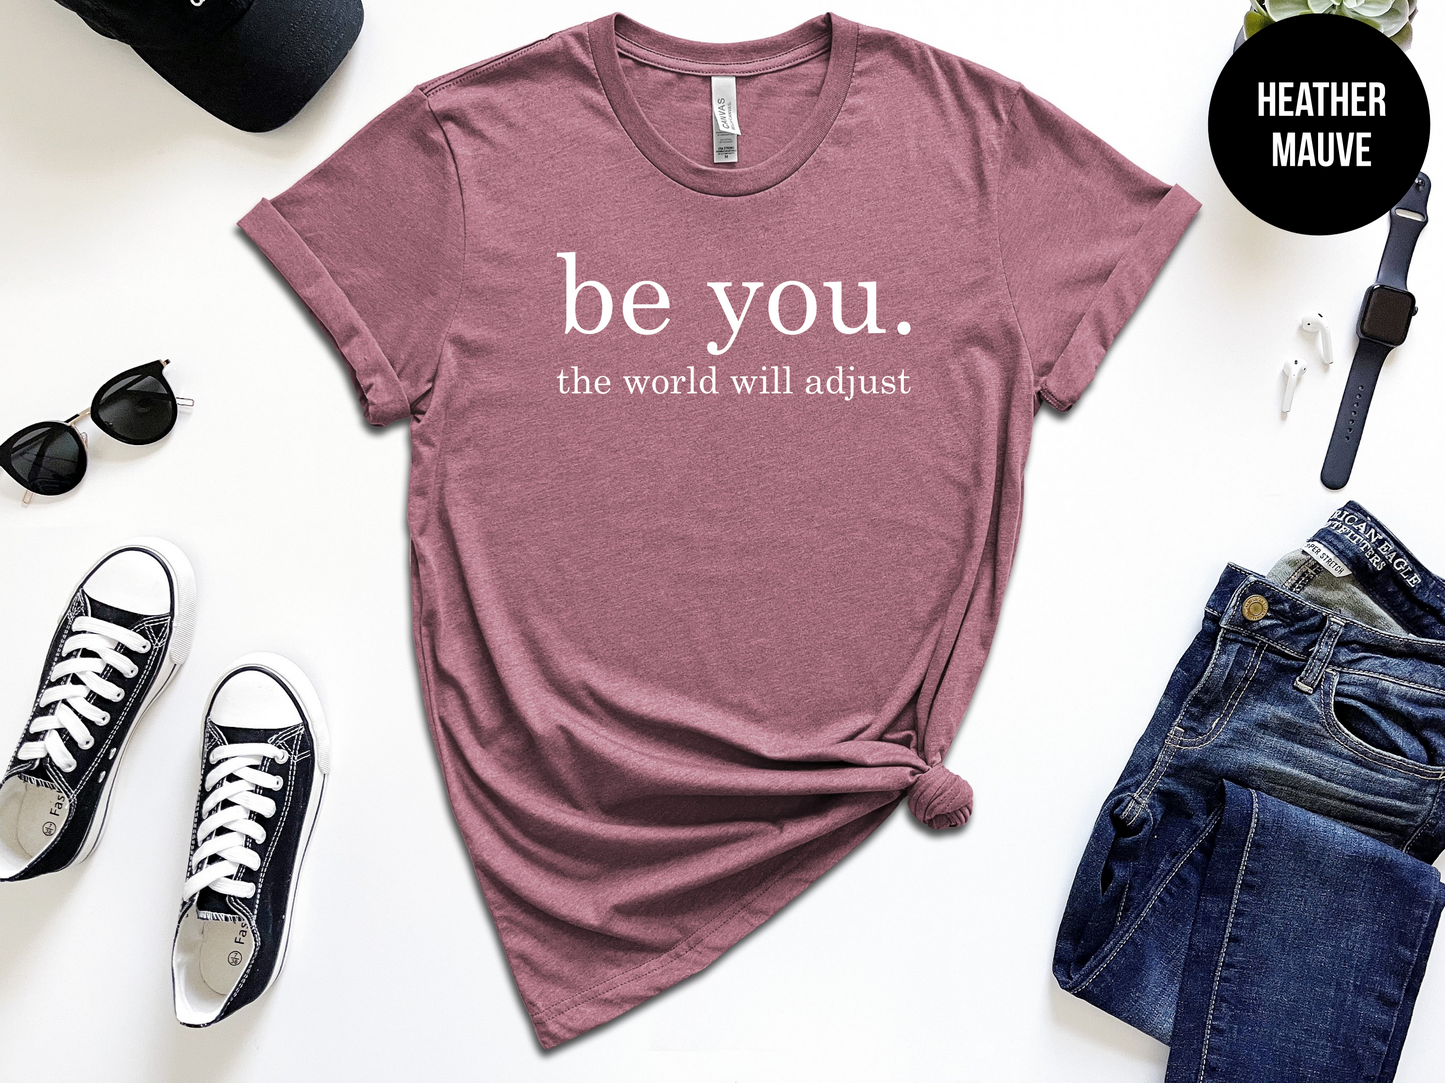 Be You. The World Will Adjust